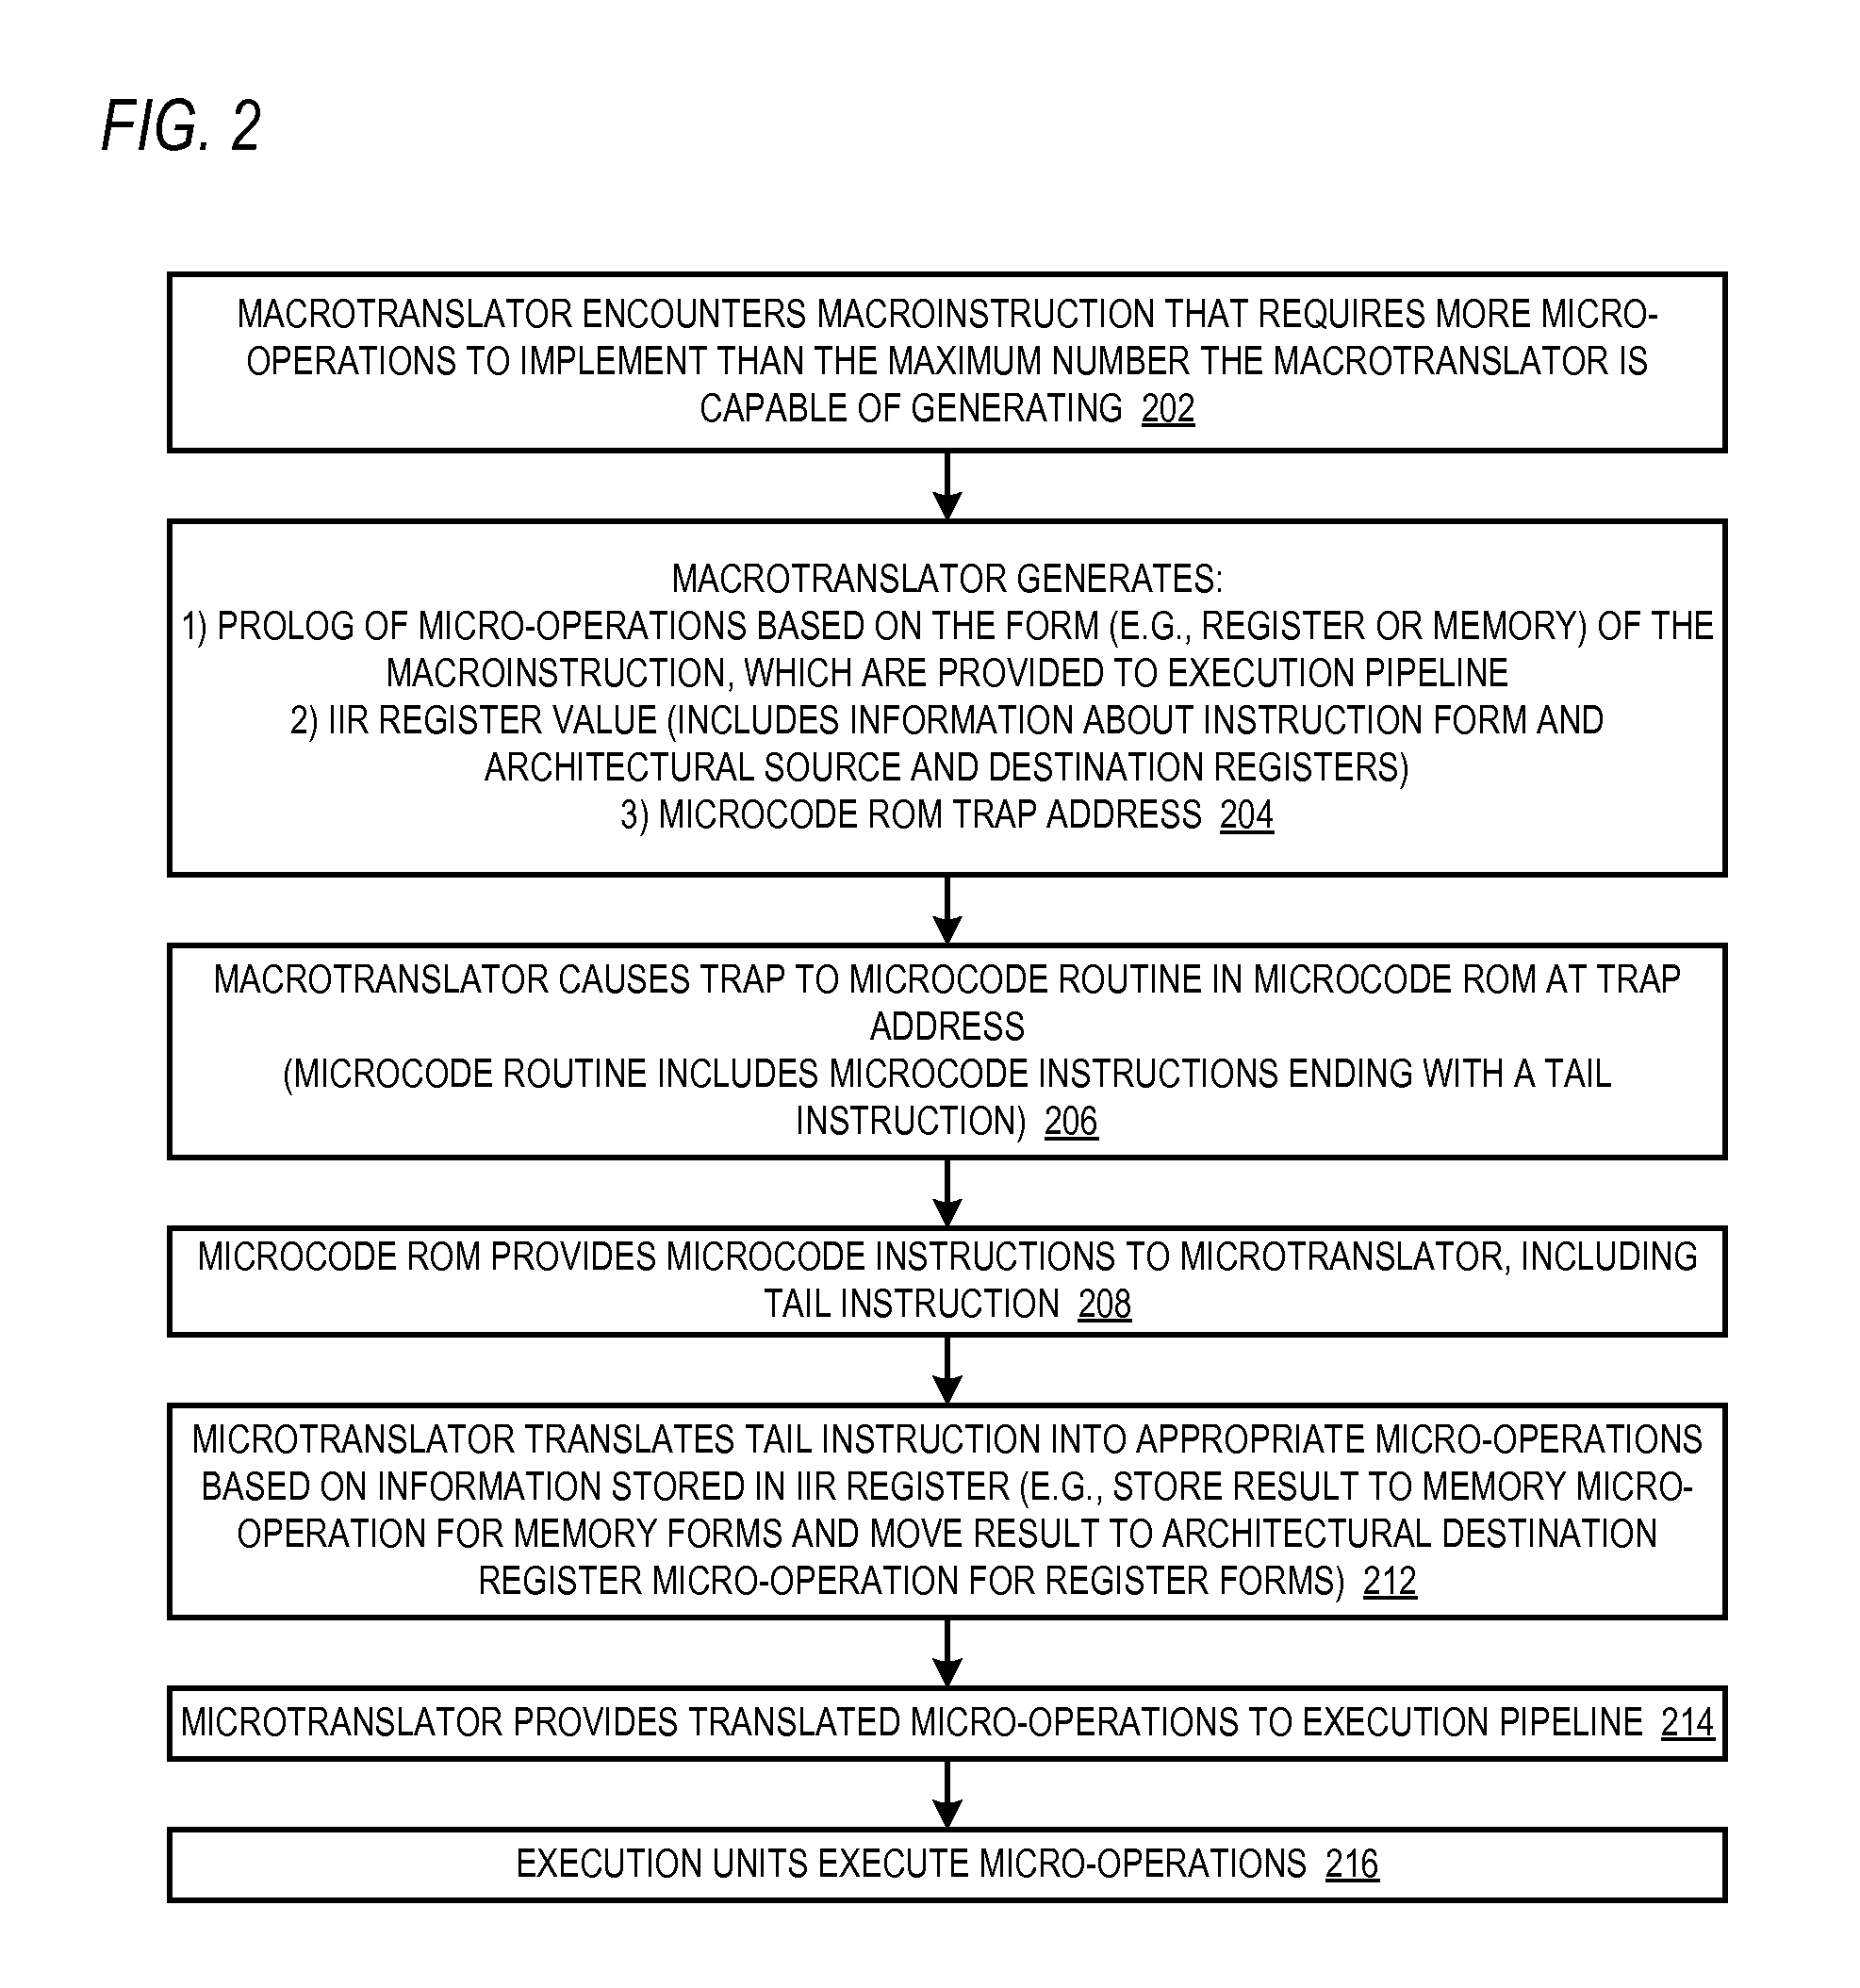 Microprocessor with microtranslator and tail microcode instruction for fast execution of complex macroinstructions having both memory and register forms